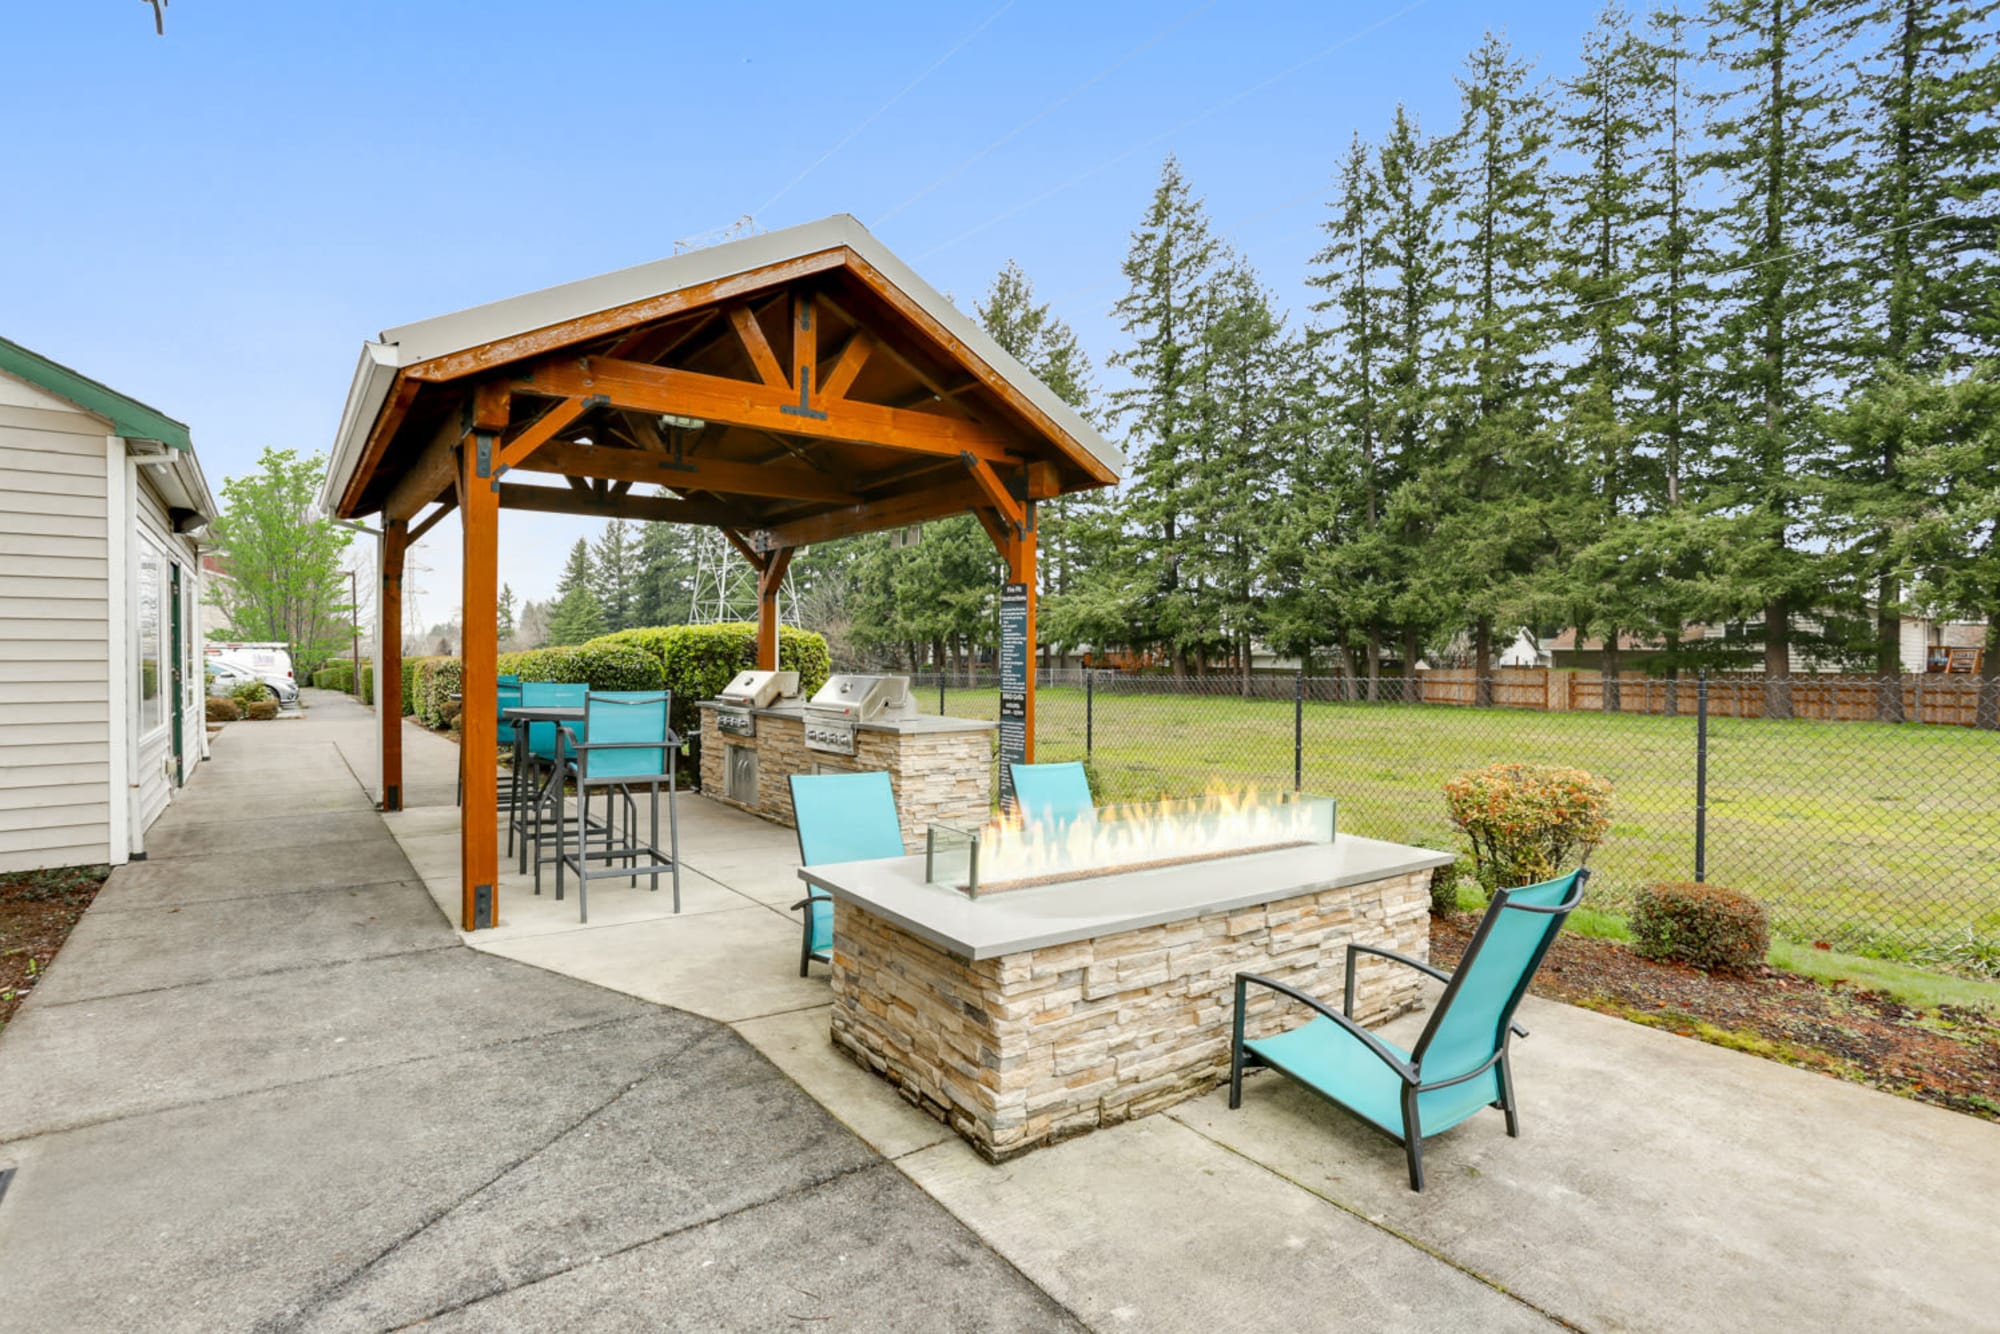 Fire pit lounge area at The Landings at Morrison Apartments in Gresham, Oregon